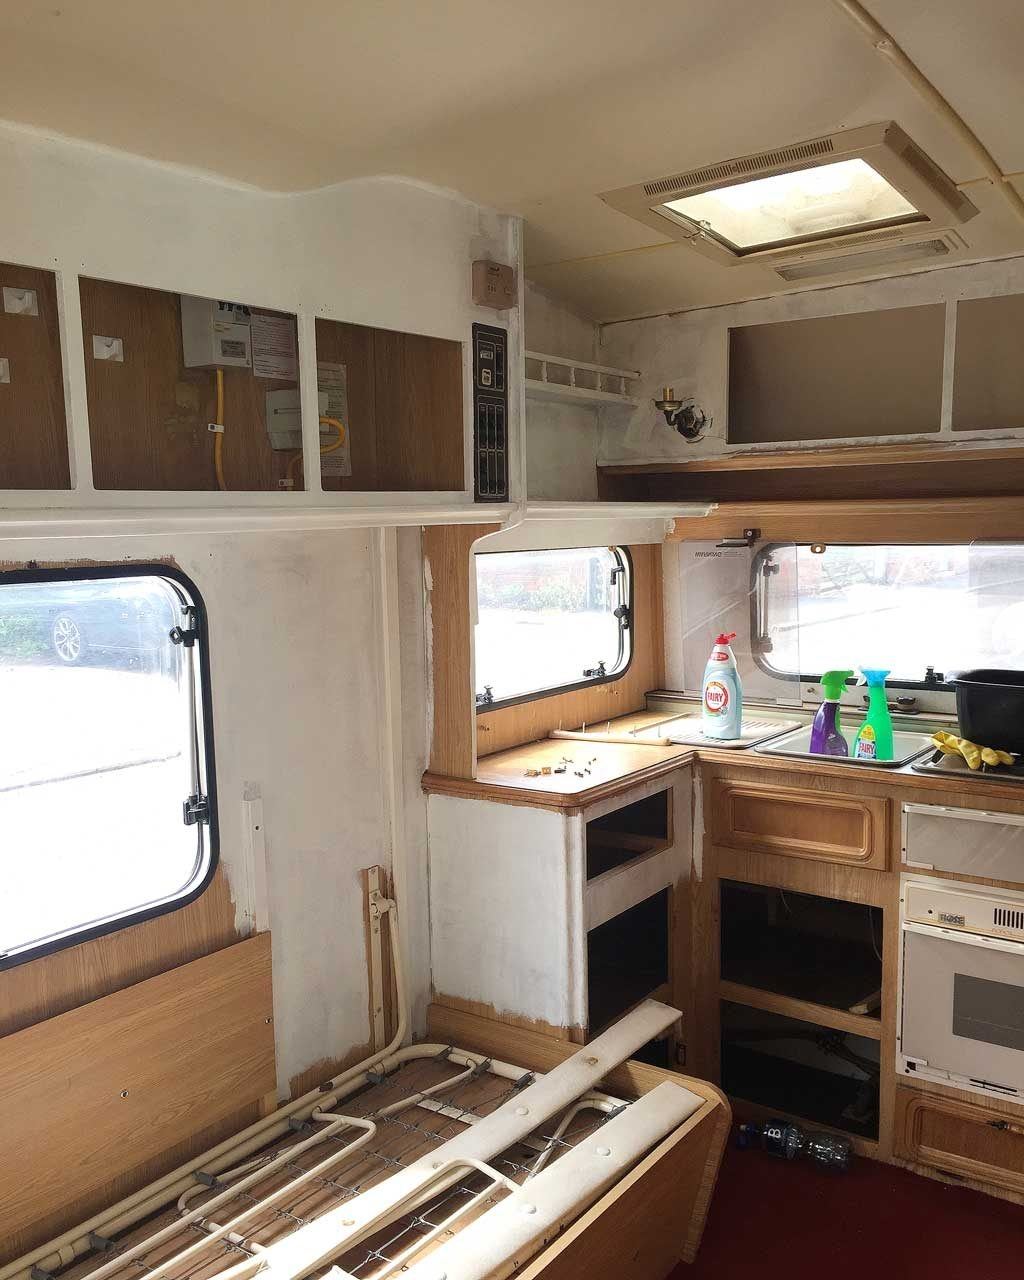 I've included a photo of a revamped caravan interior too